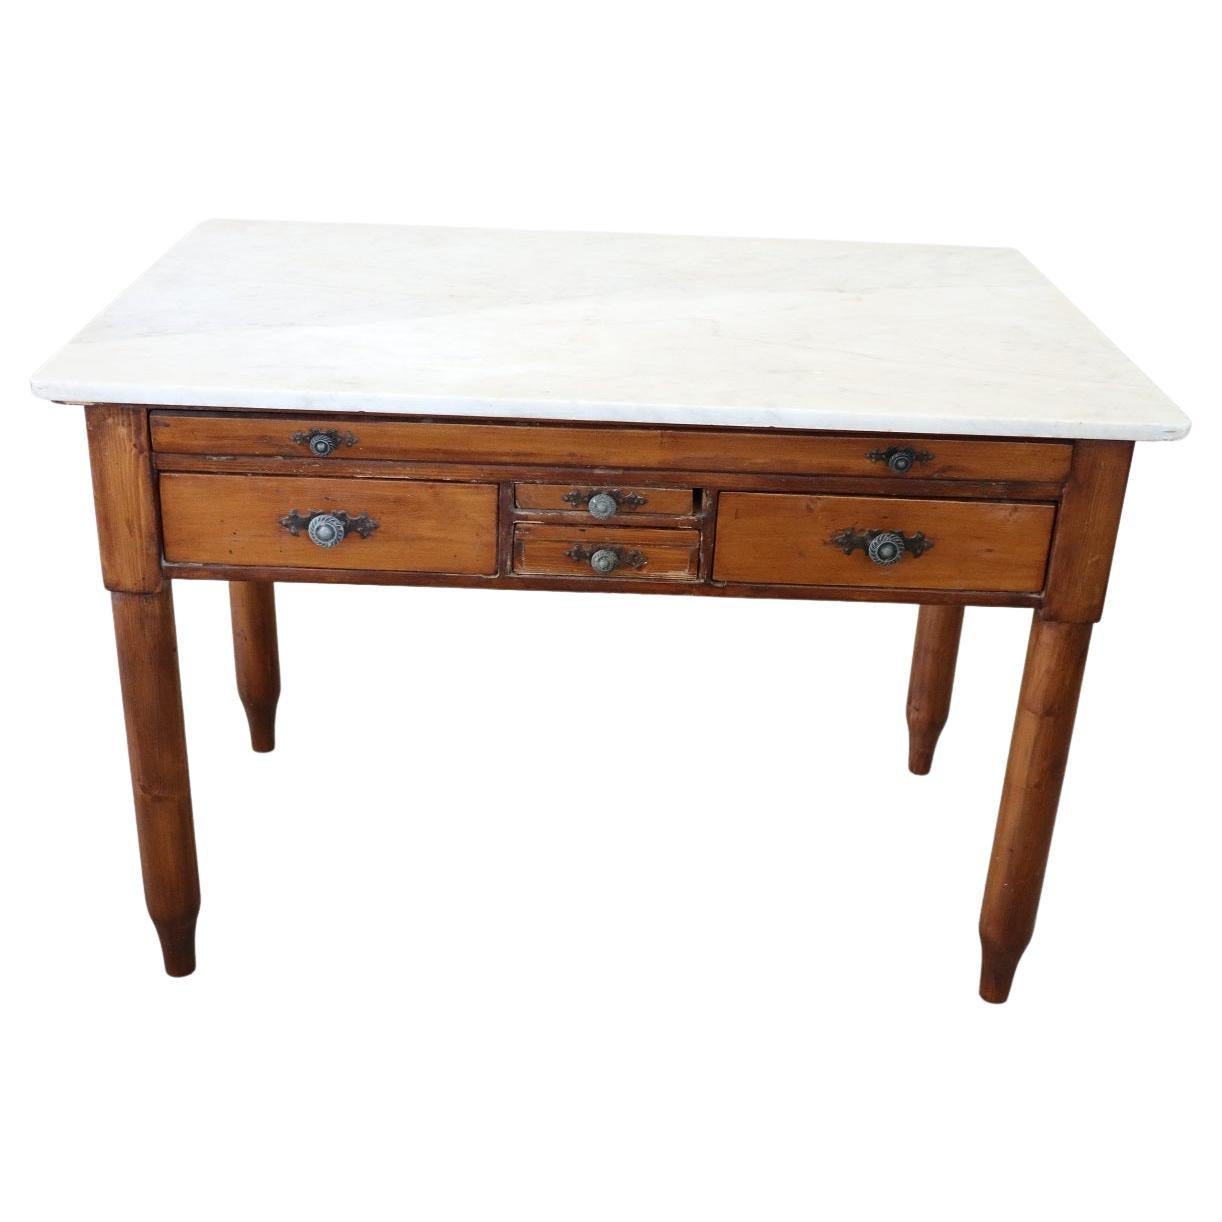 Early 20th Century Italian Kitchen Pasta Table with Marble Top and Accessories